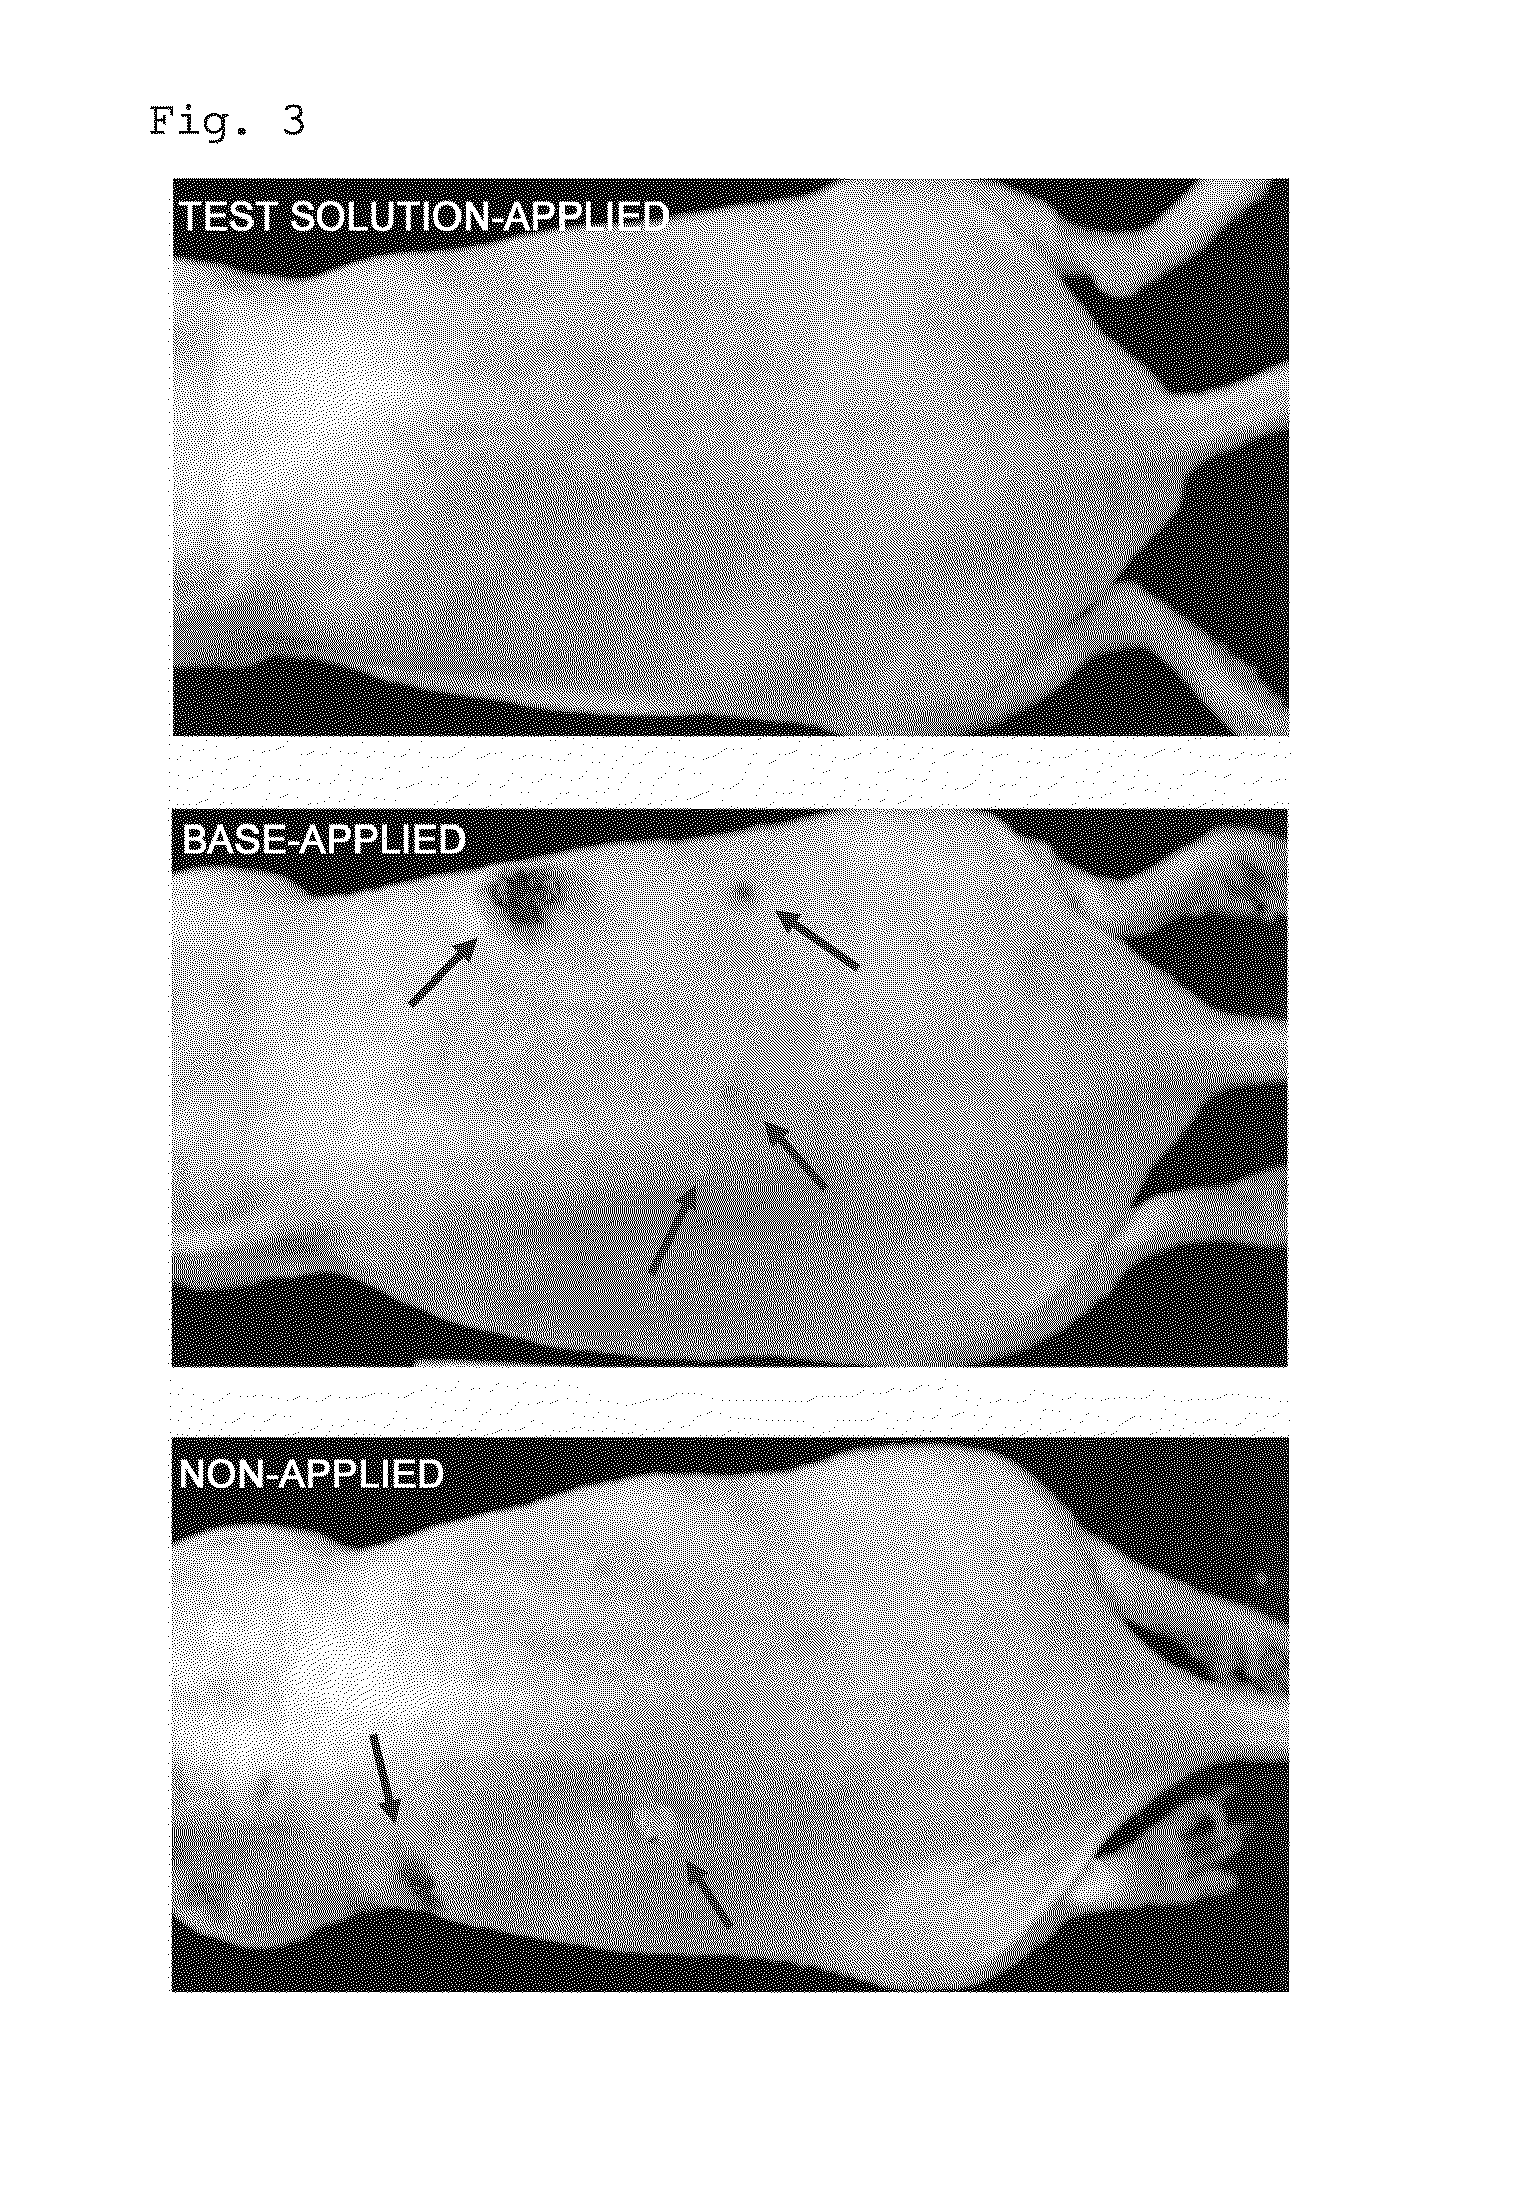 Agent for suppressing the formation of abnormal skin cells caused by exposure to light